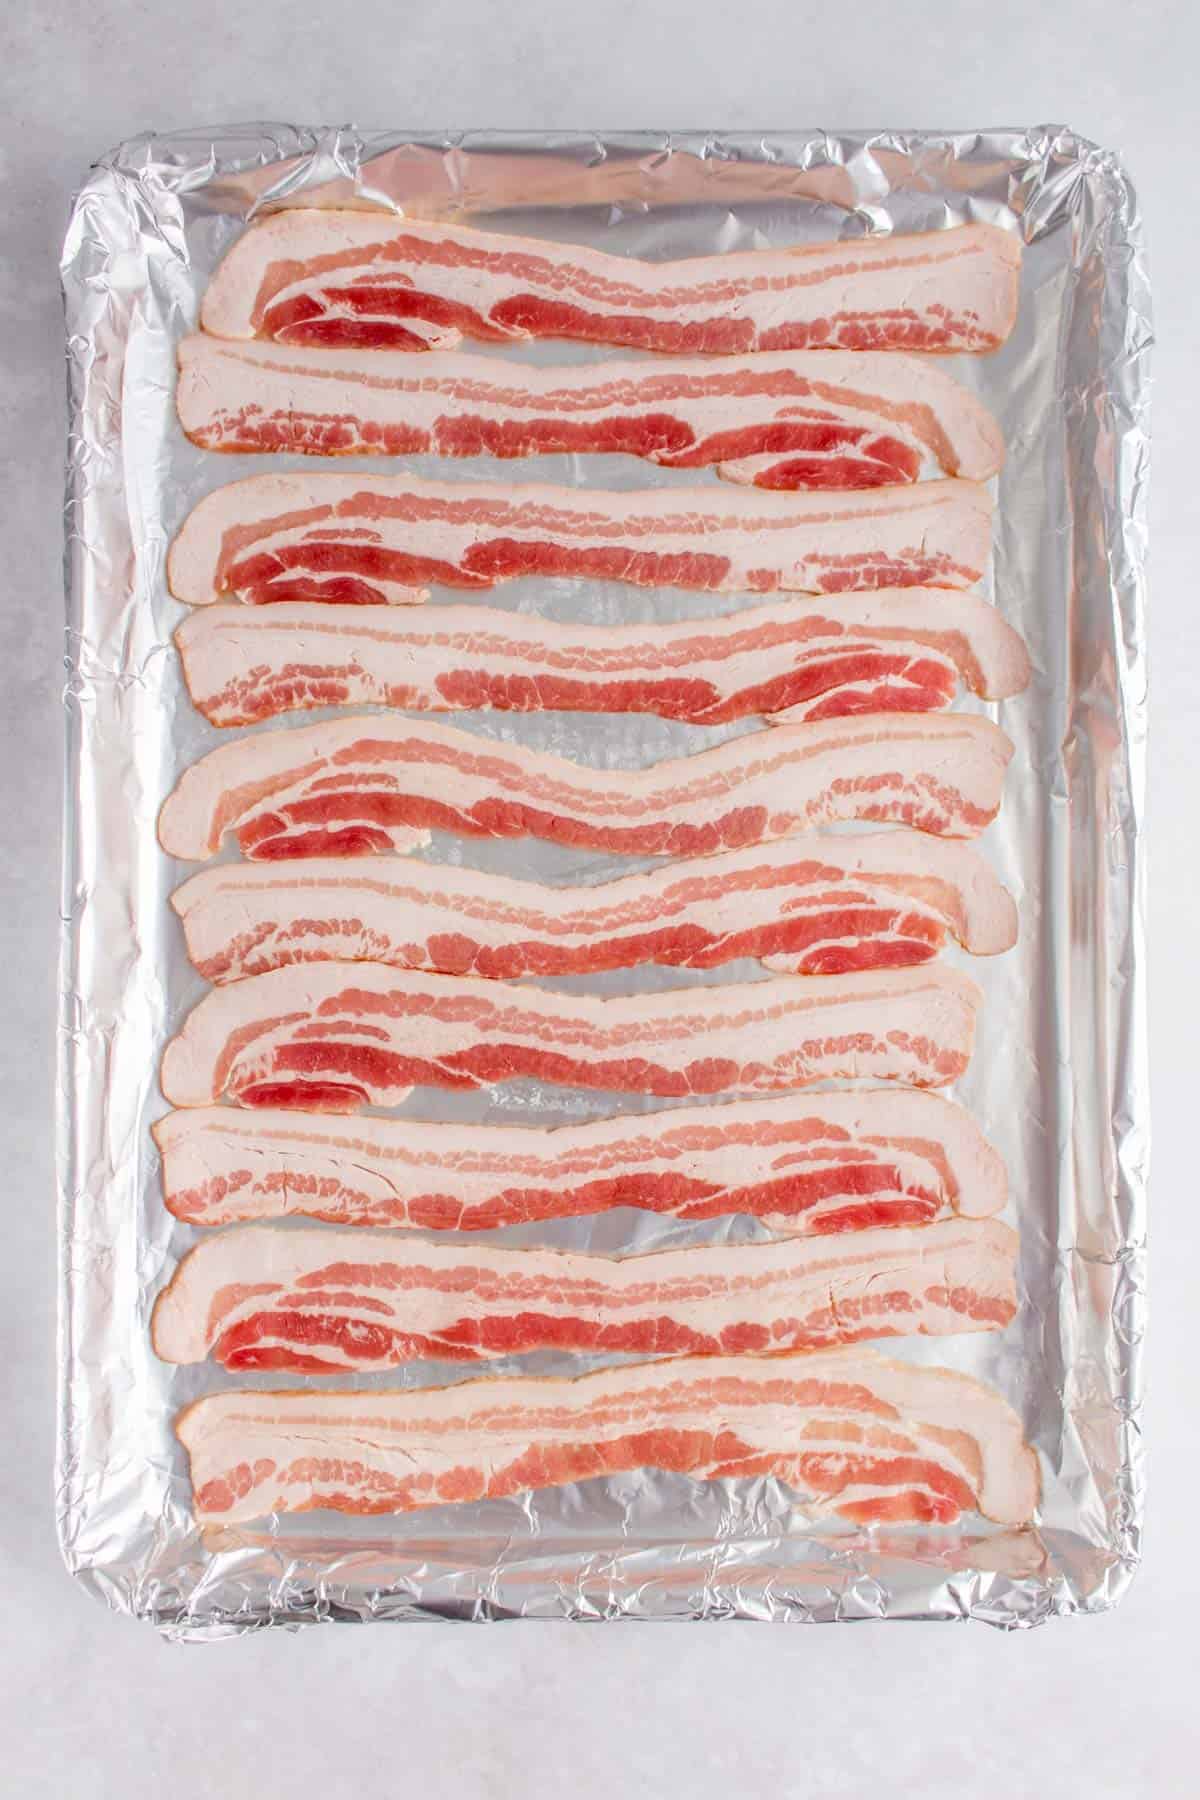 Ten strips of bacon on a lined sheet pan.